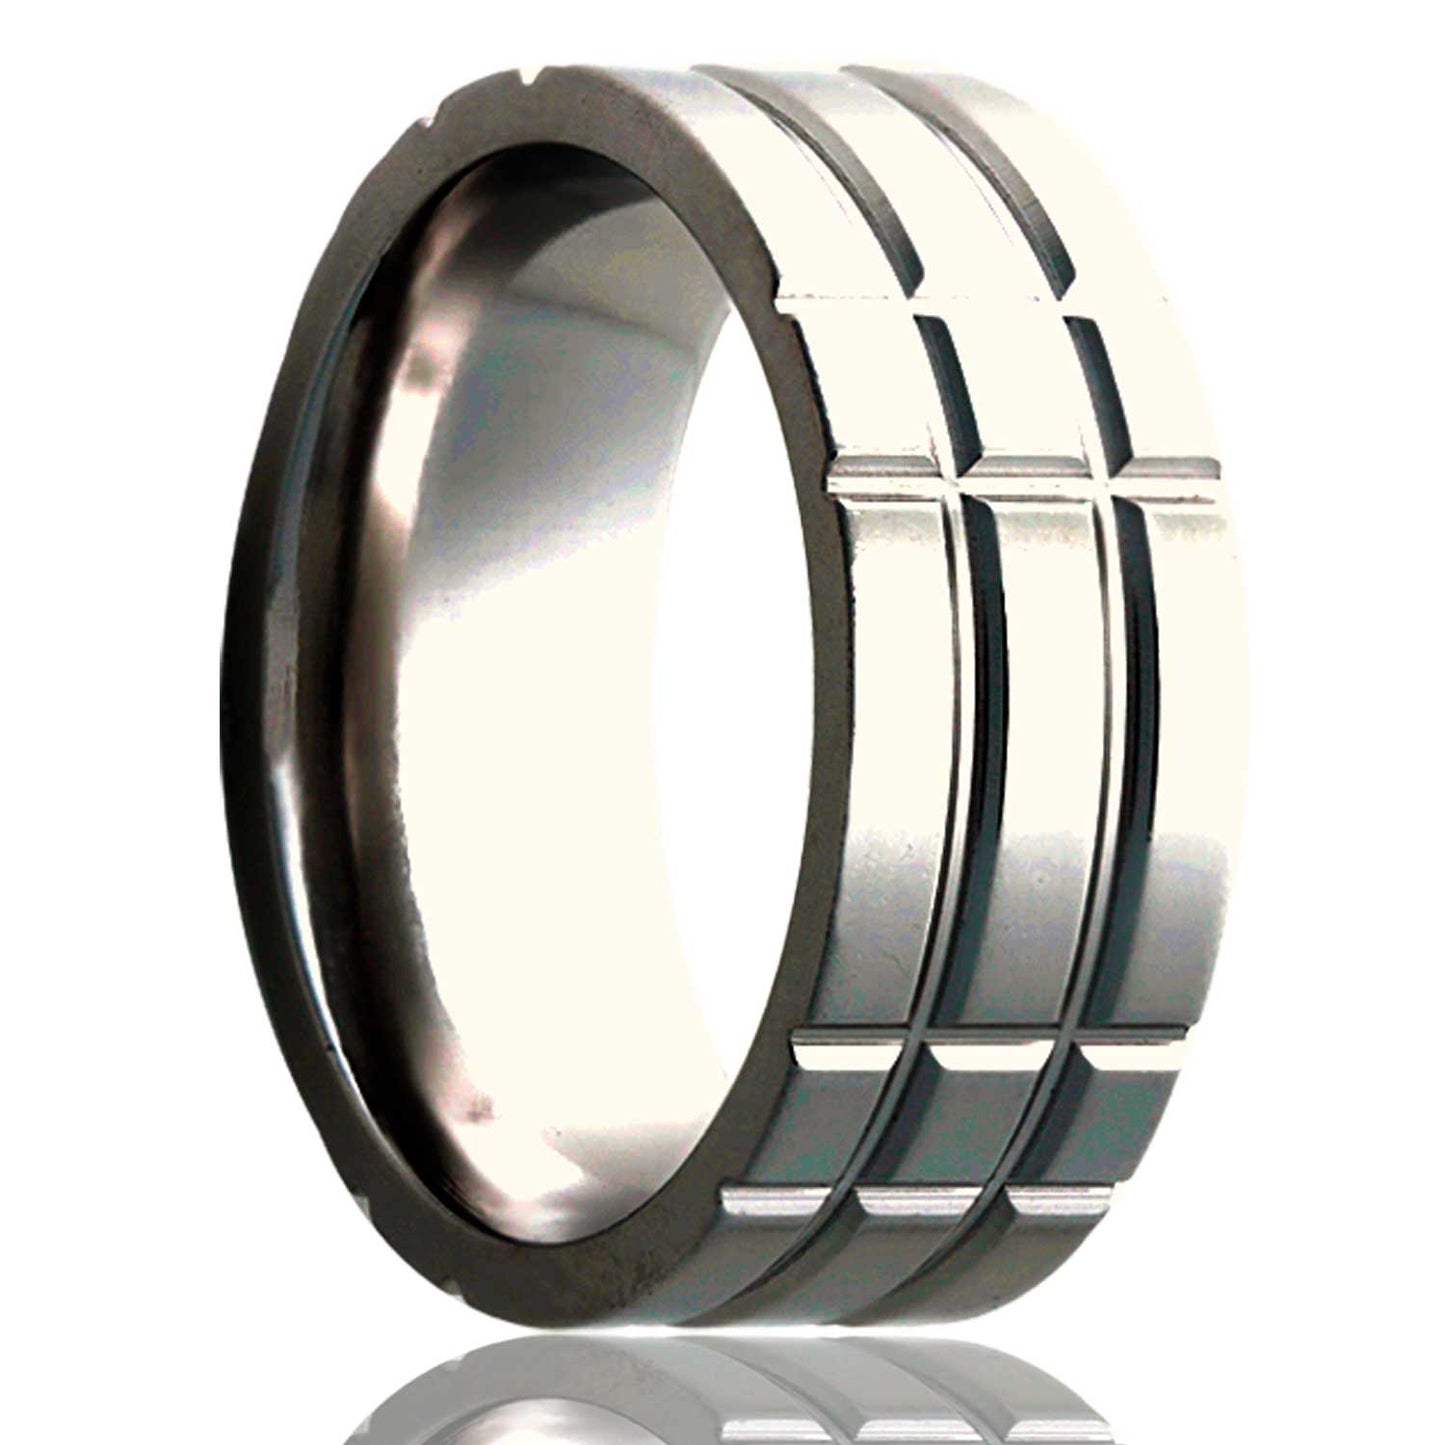 A intersecting grooves cobalt wedding band displayed on a neutral white background.